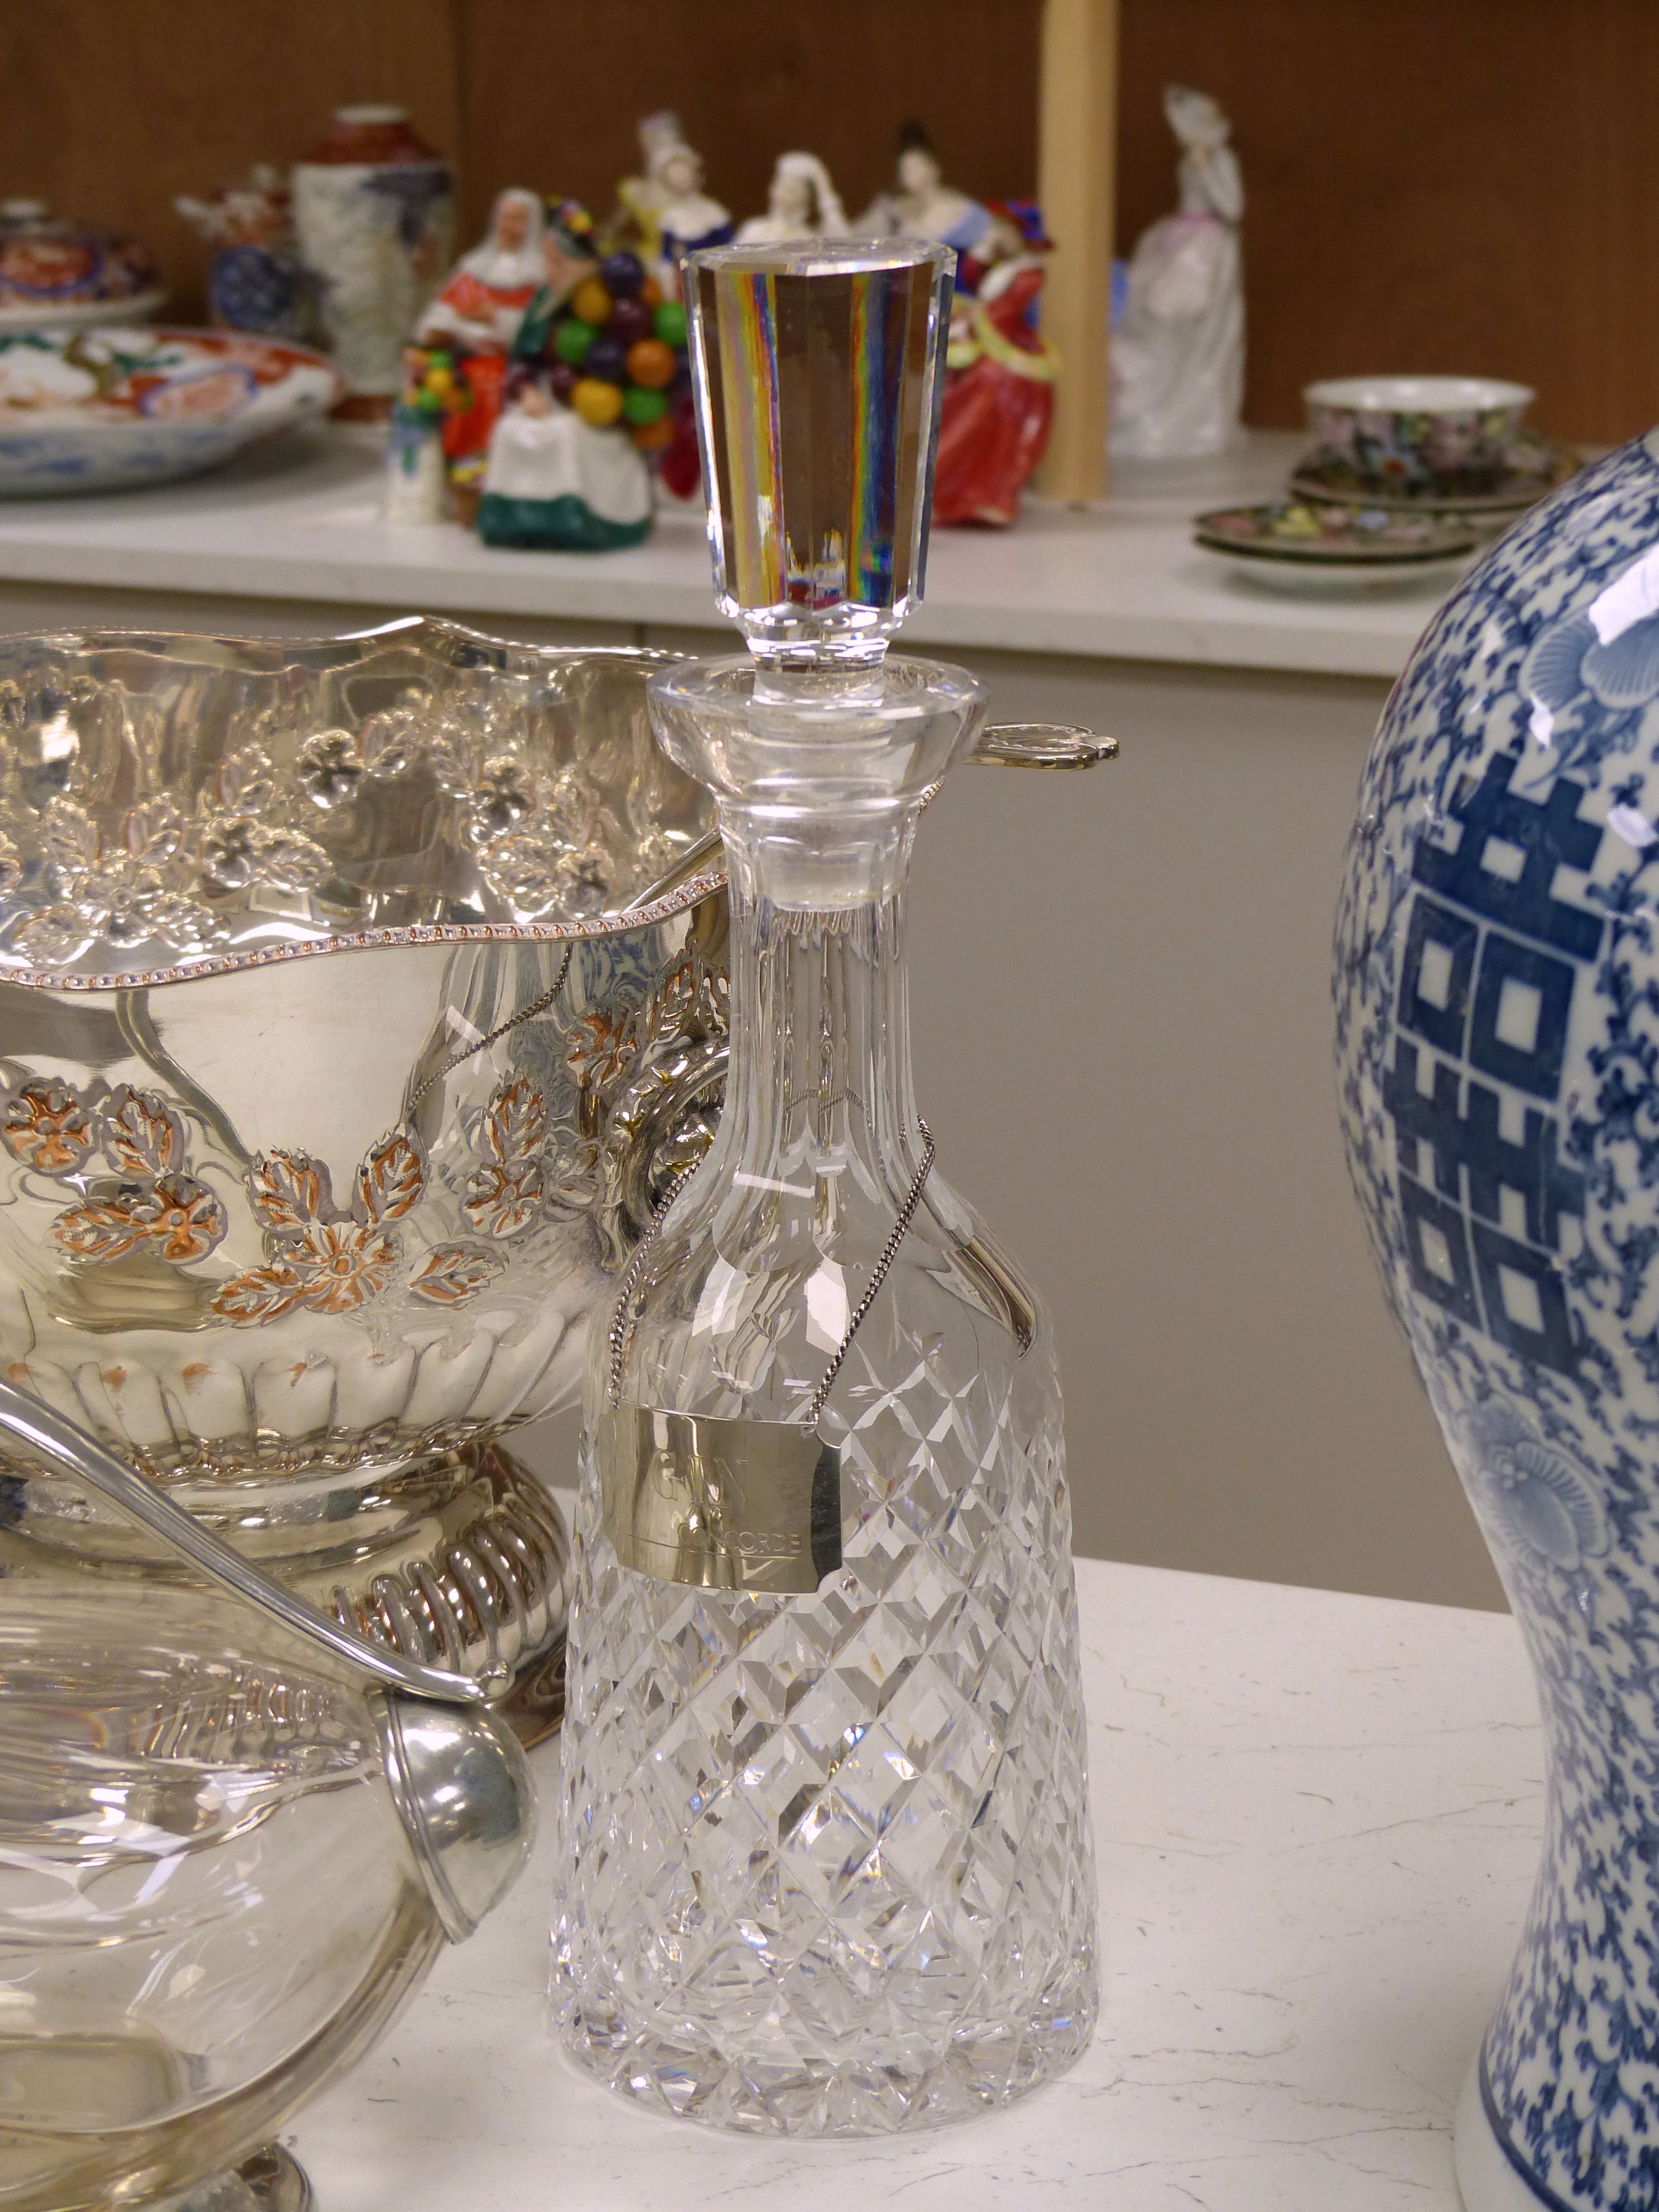 Two cut glass decanters (one silver-mounted), two silver Whisky and Gin labels, an 'Etains du Manoir' duck shaped wine carafe and two other items